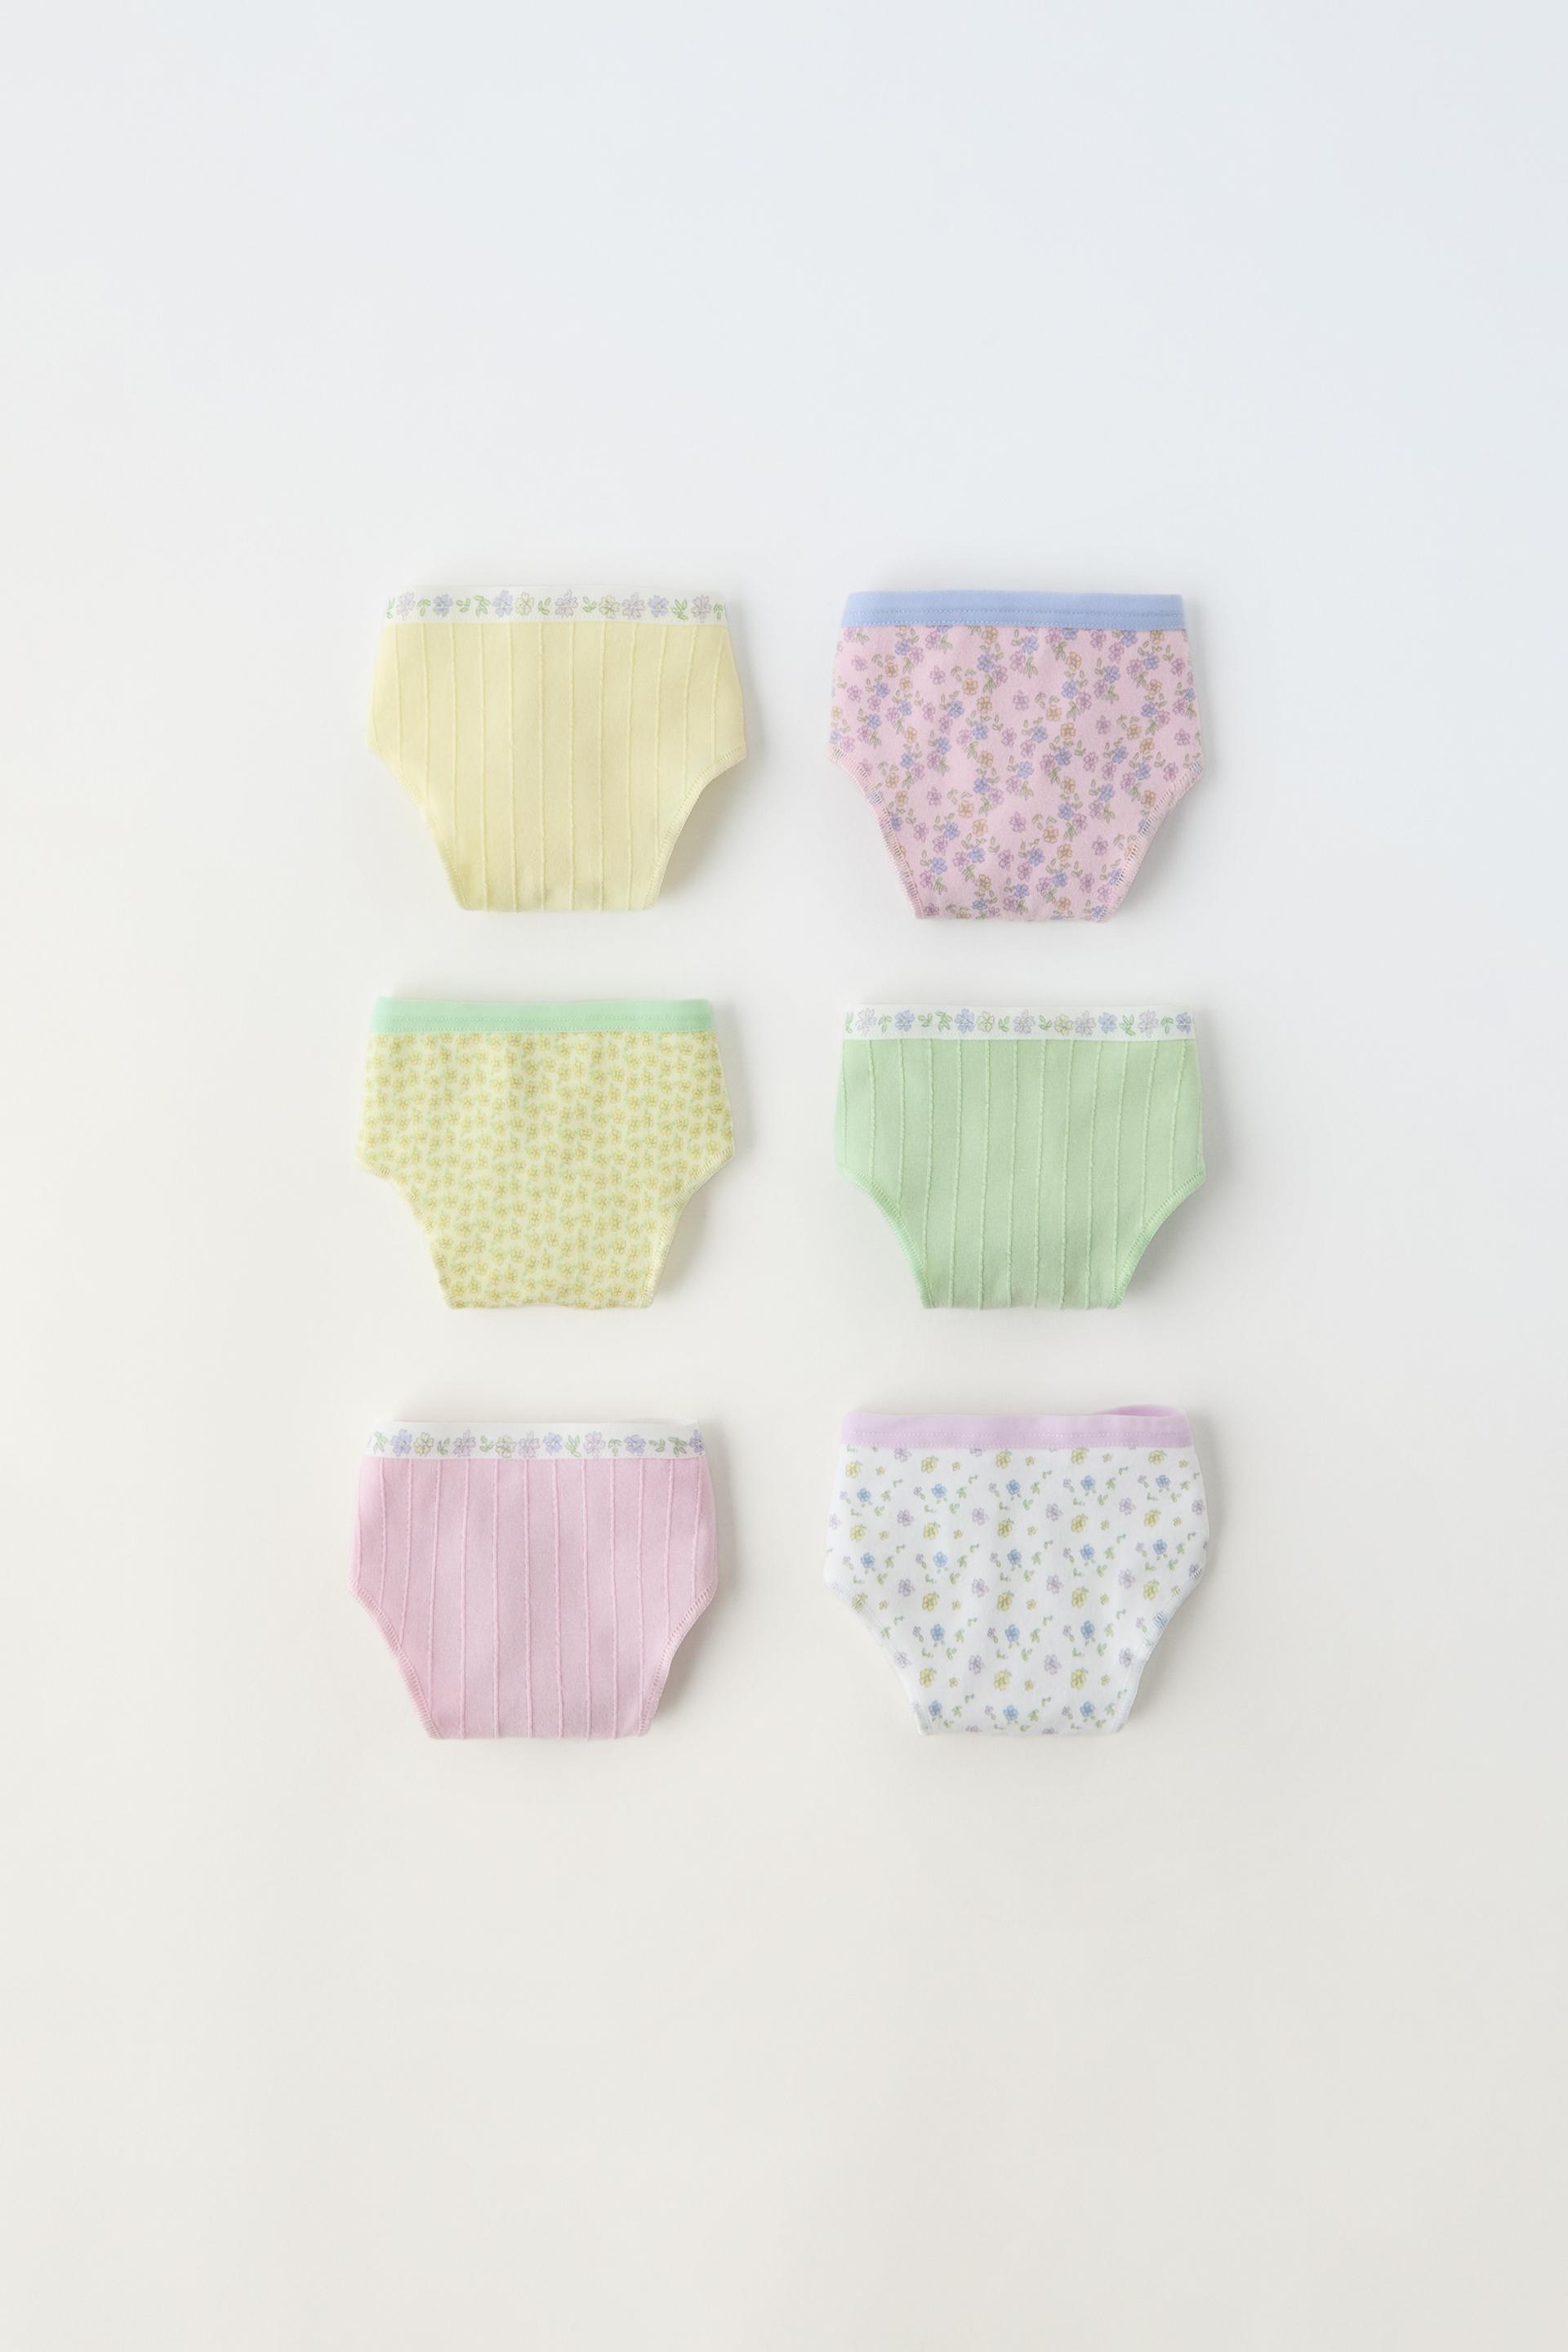 2-6 YEARS/ SIX-PACK OF STRUCTURED AND FLORAL UNDERWEAR ZARA